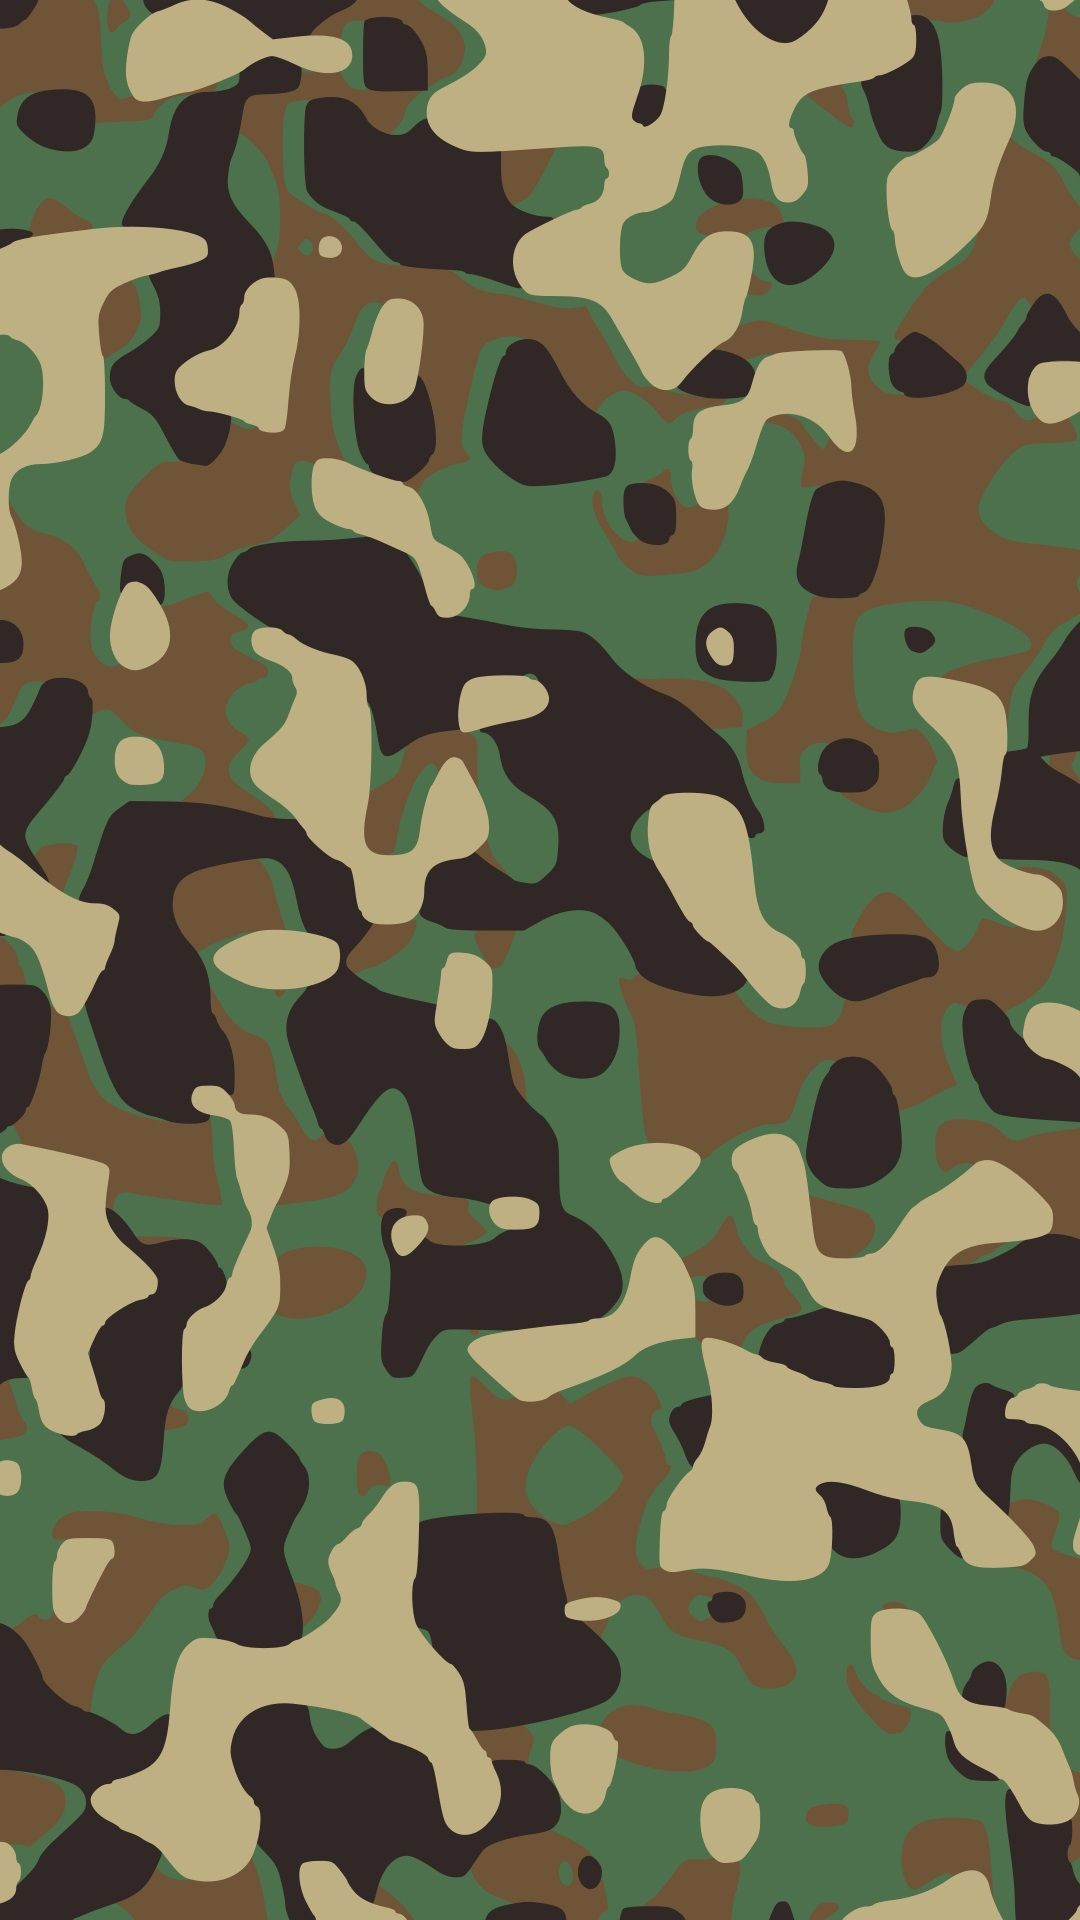 1080x1920 Camouflage Wallpaper For Iphone Or Android Tags Camo Hunting within Camo  Iphone Wallpaper